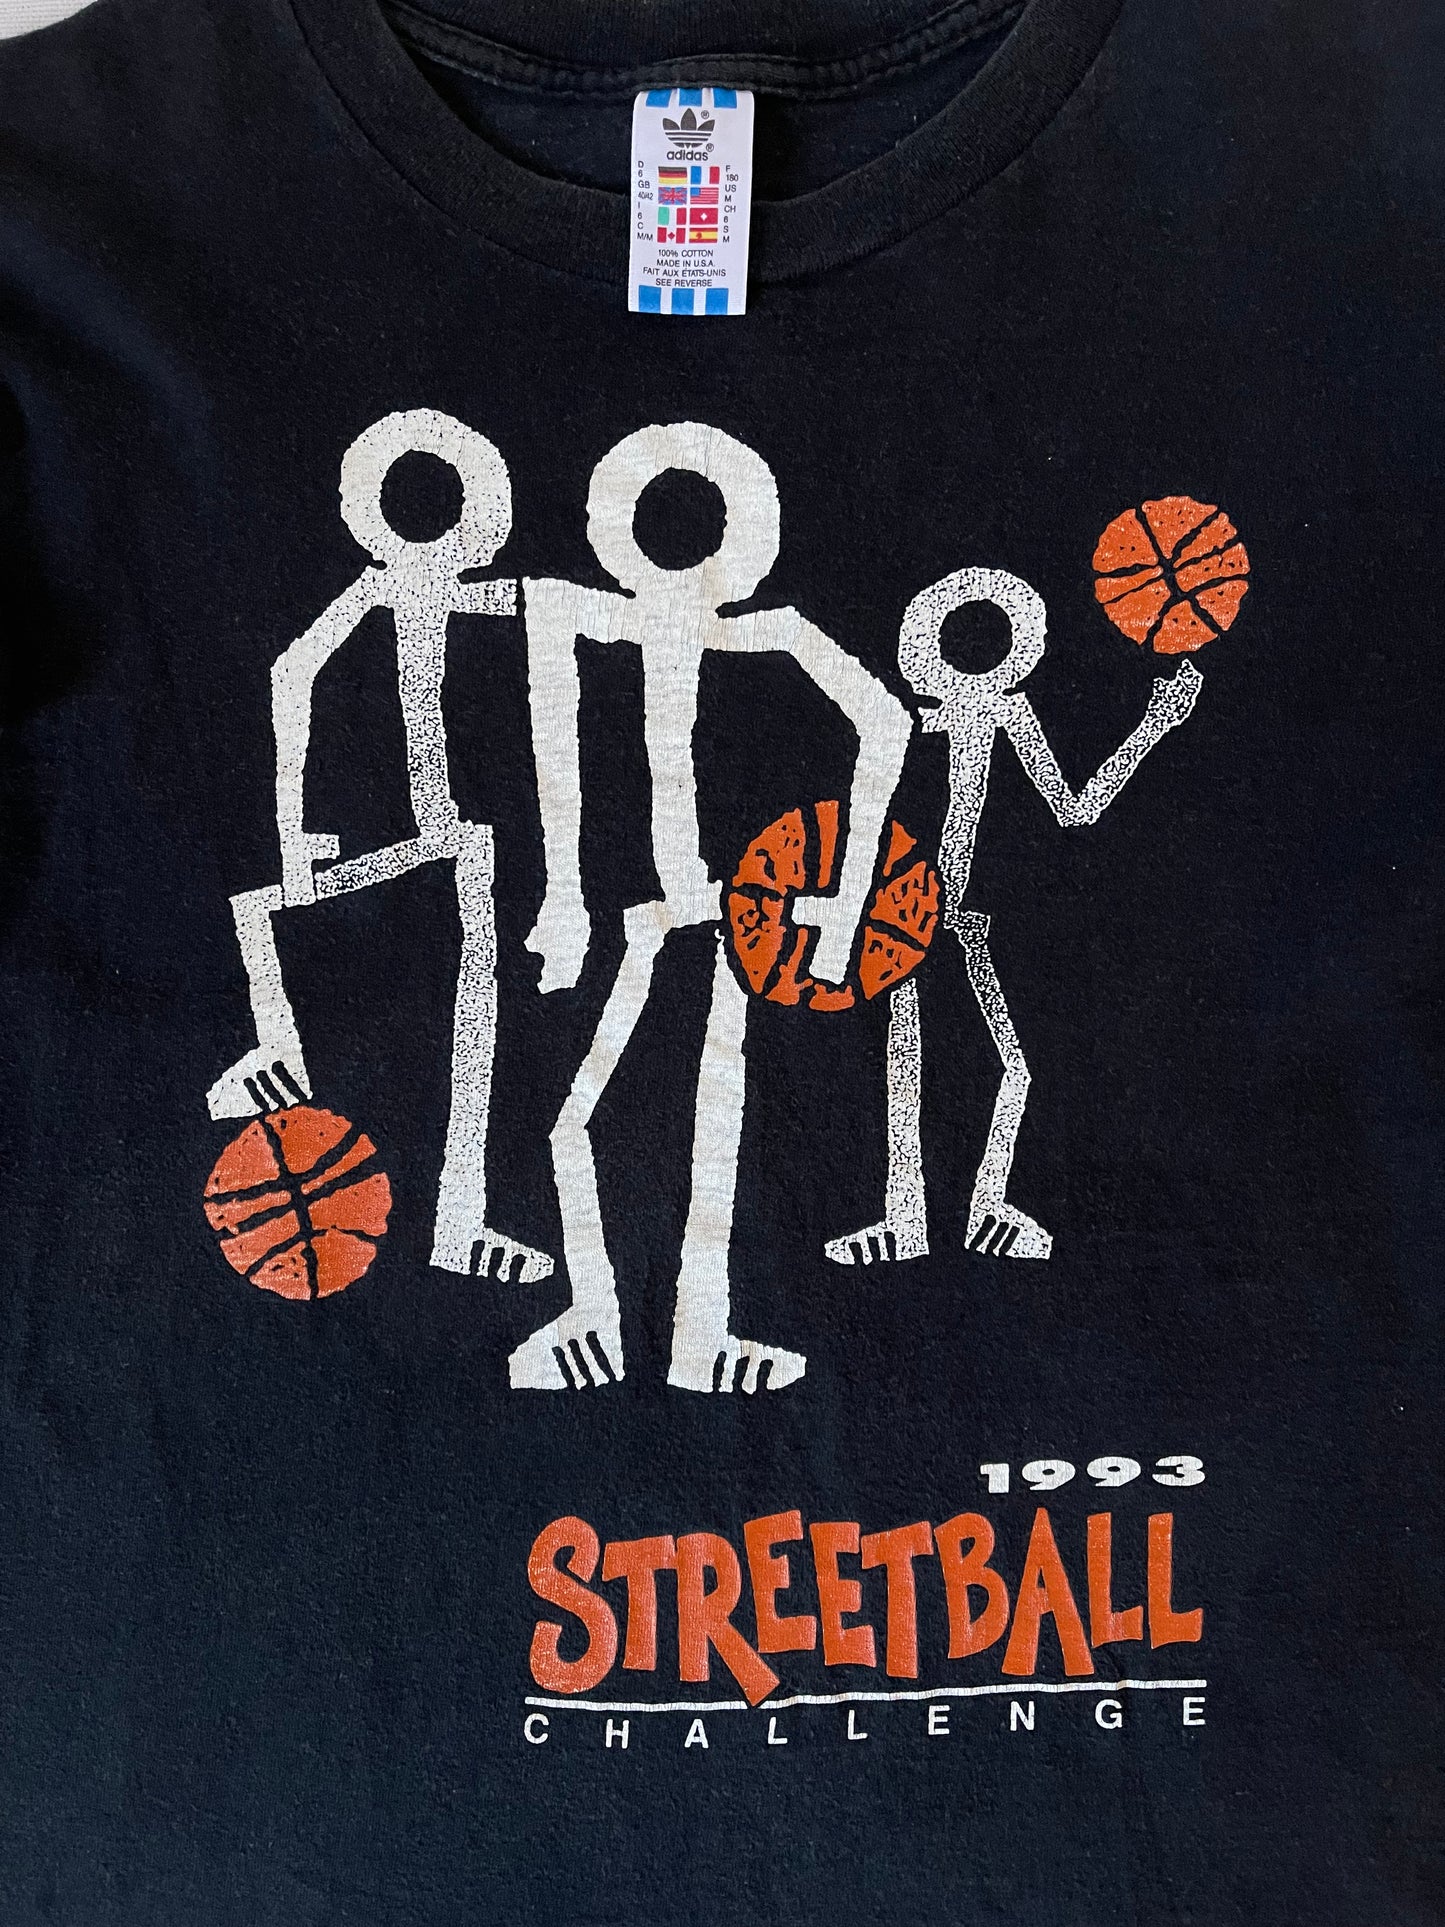 Vintage Adidas Streetball Challenge 1993 T-Shirt Black Made in USA Size M 100% Cotton